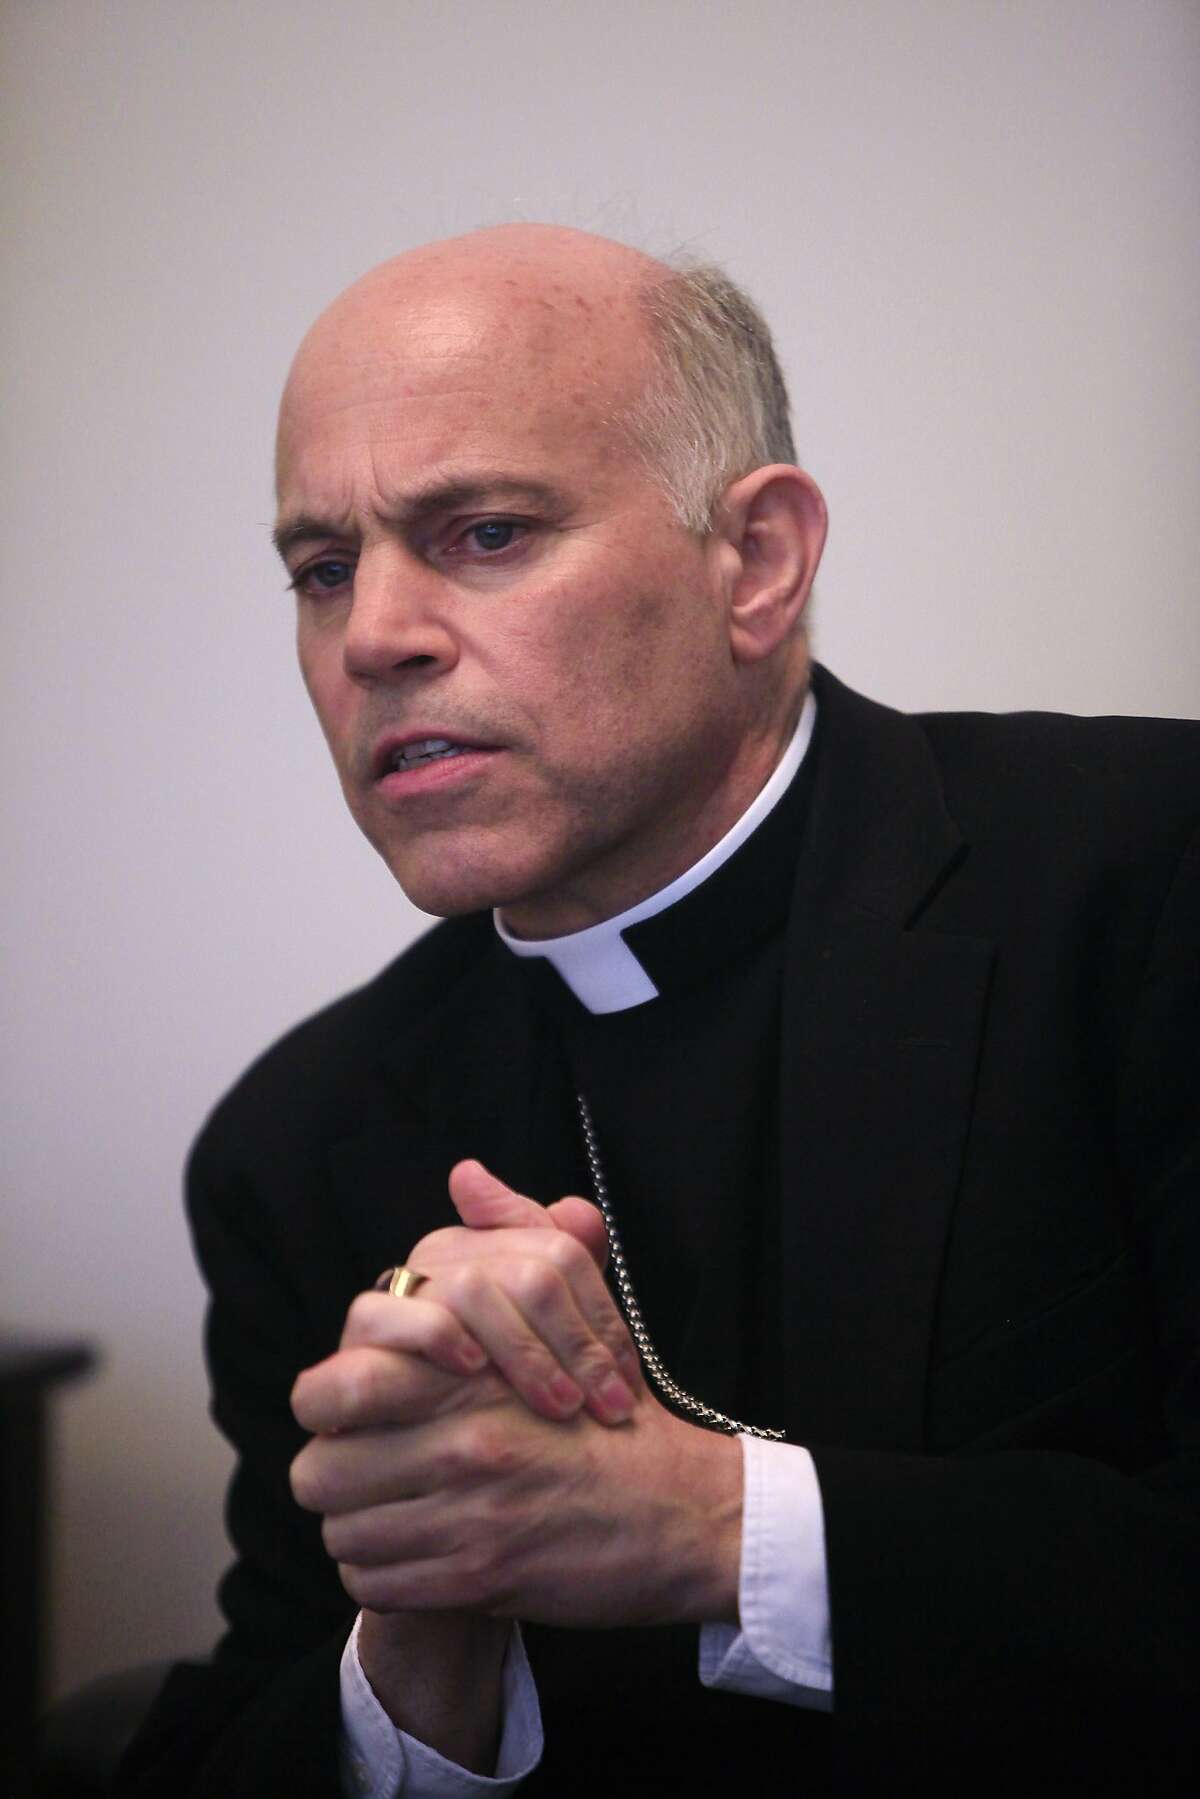 Archbishop Salvatore Cordileone is seen at the Archdiocese of San Francisco on Thursday, June 6, 2013 in San Francisco, Calif.